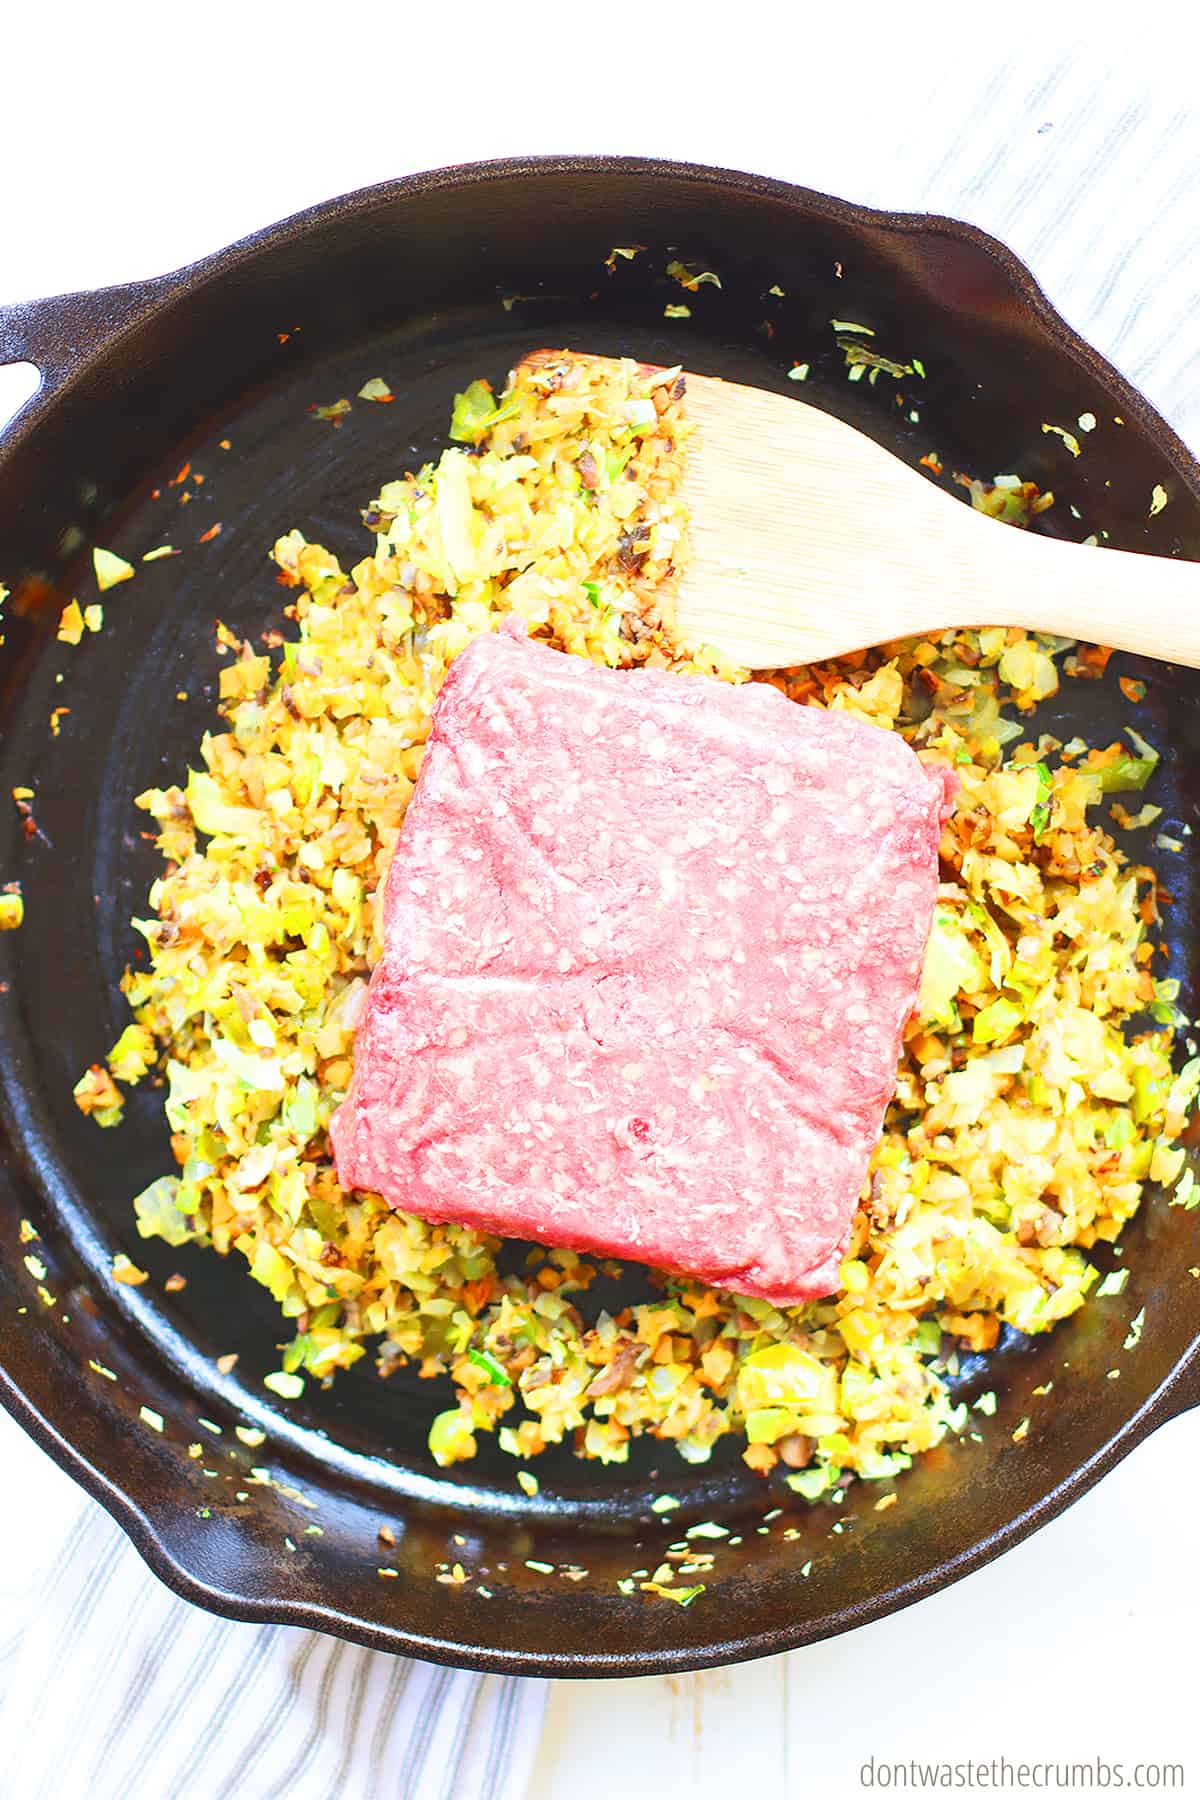 Raw meat on top of the meat filler mixture in a cast iron skillet with a wood spoon stirring.